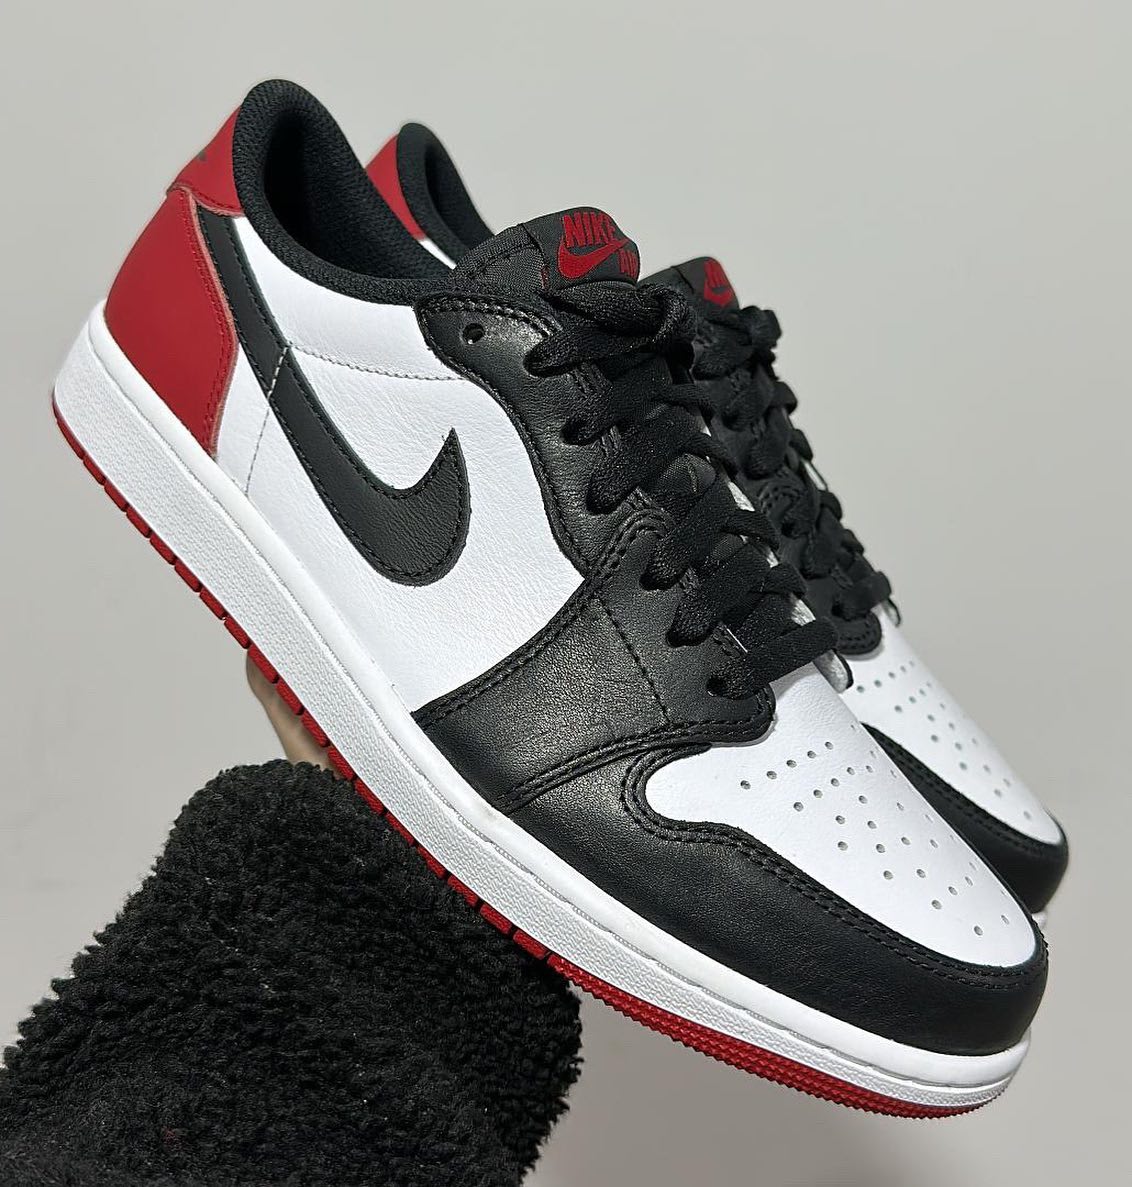 An Overview of the Air Jordan 1 Low 'Black Toe' Hype Vault